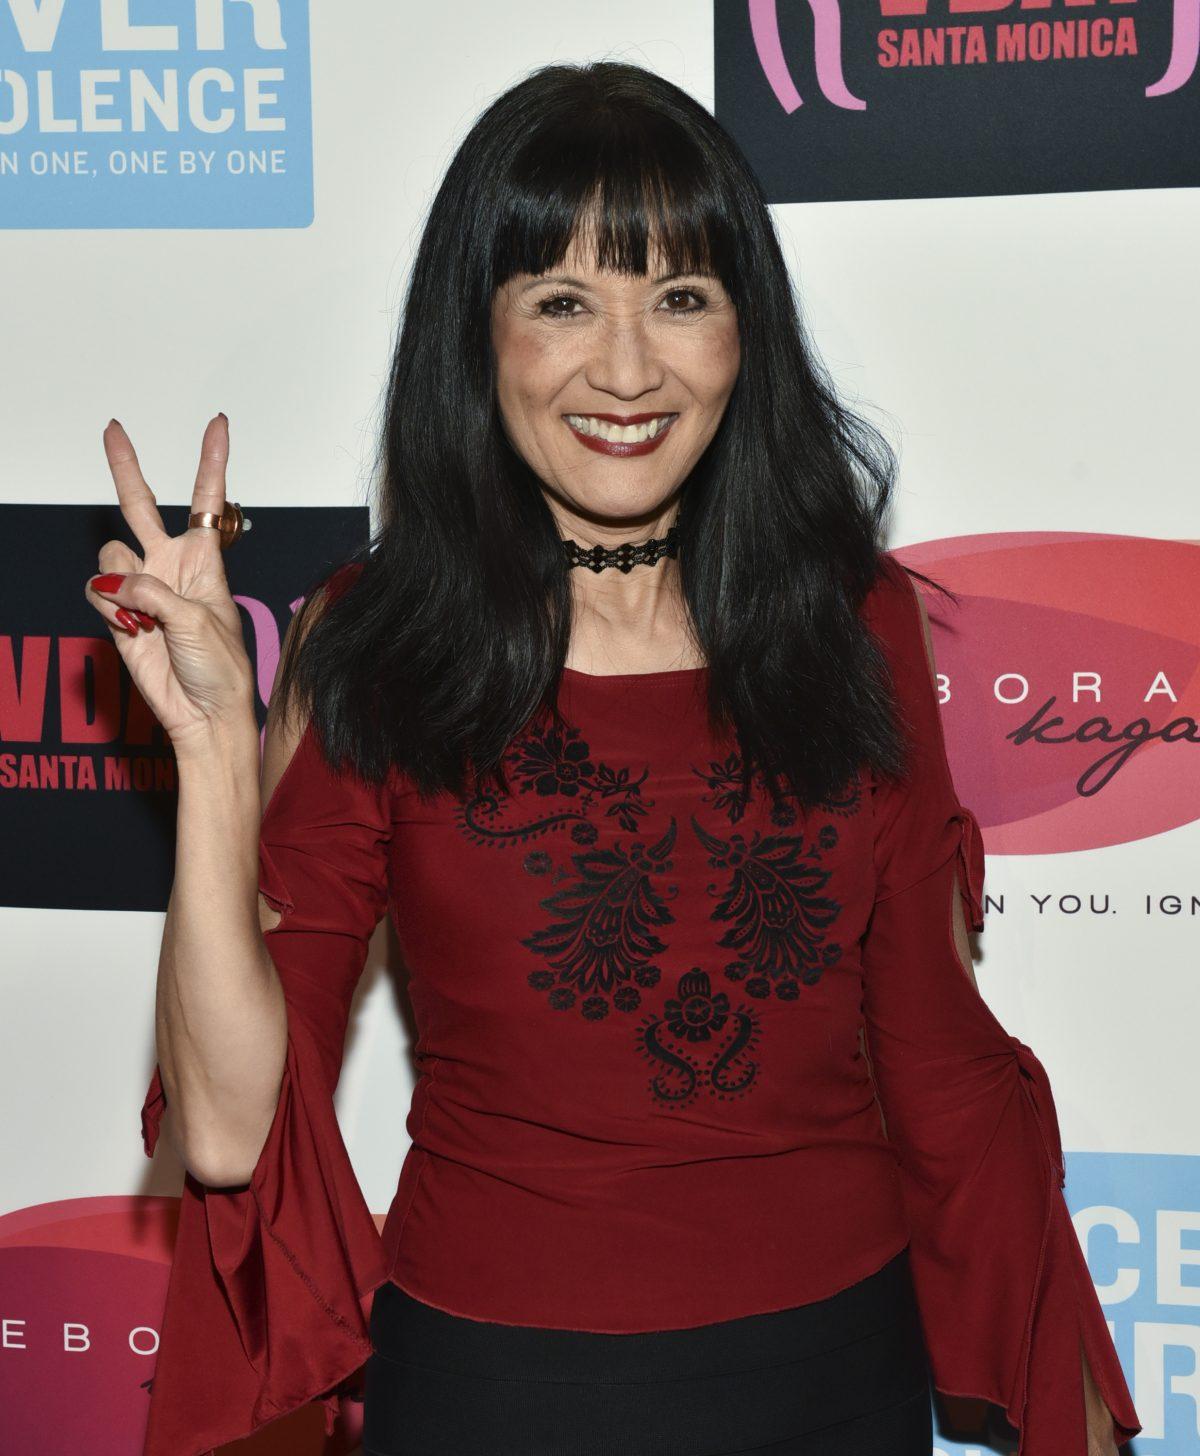 Suzanne Whang attends the 20th Anniversary of V-Day at The Broad Stage in Santa Monica, California on Feb. 17, 2018. (Photo by Rodin Eckenroth/Getty Images)